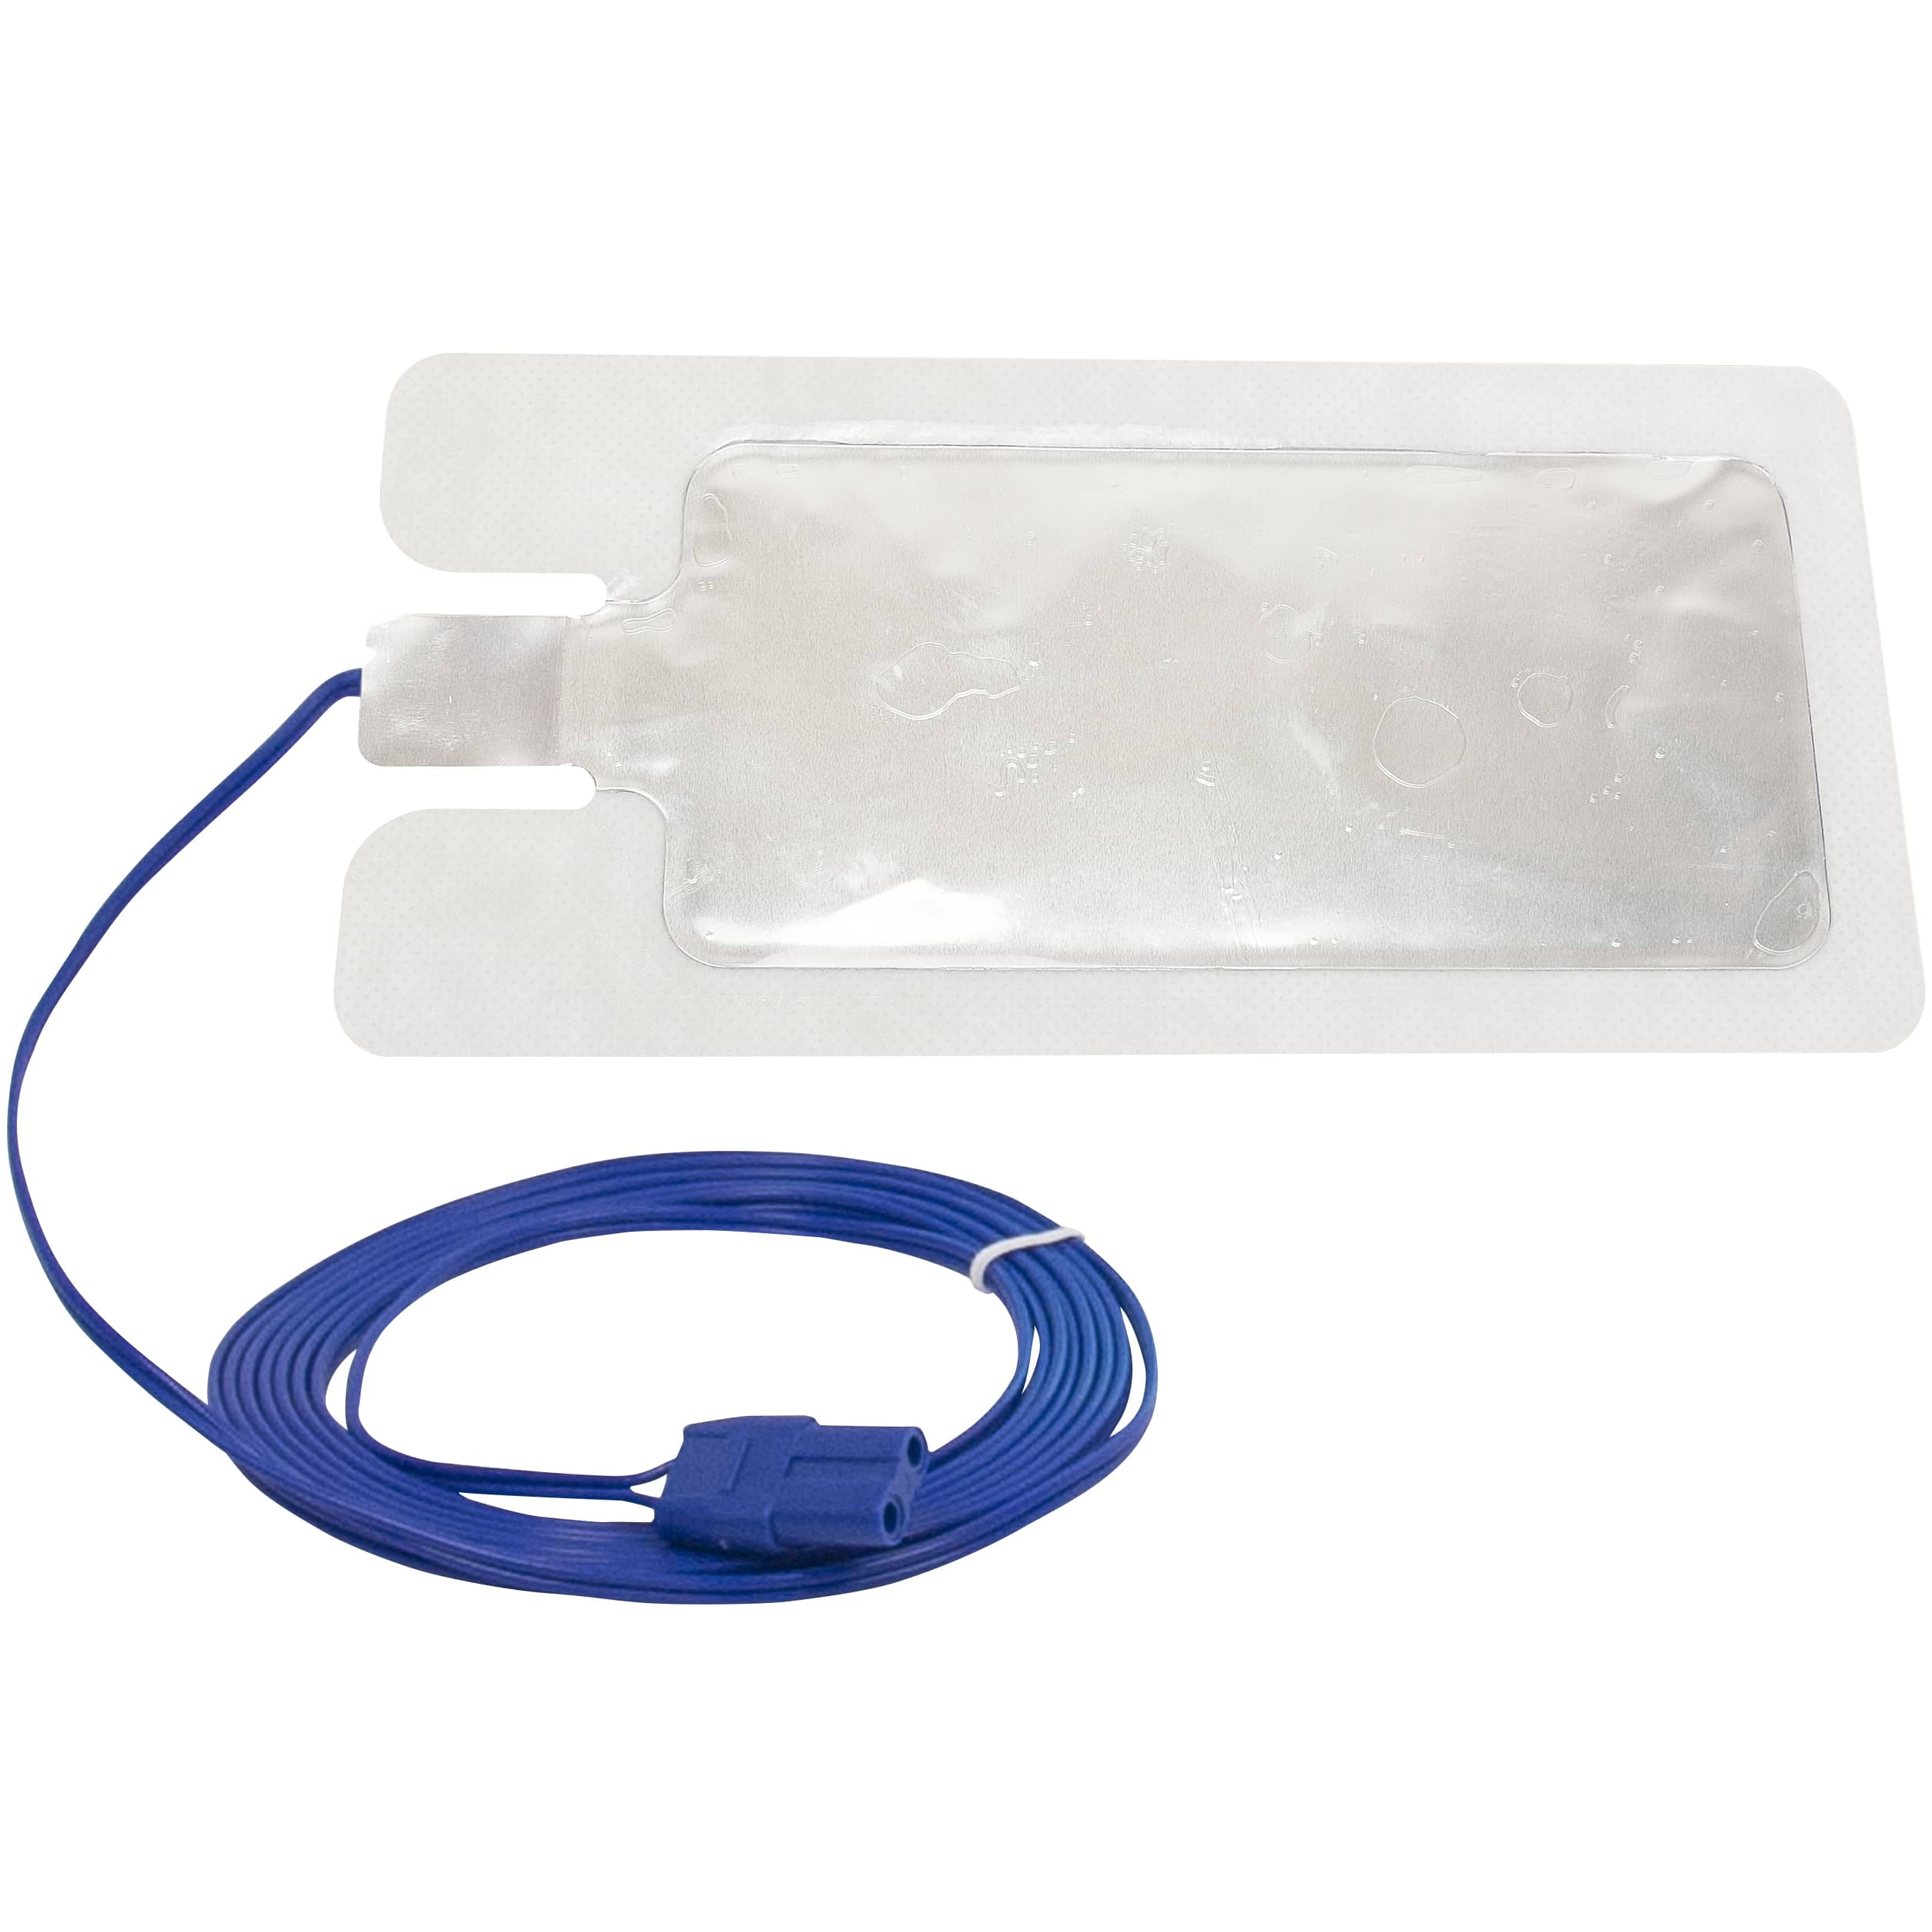 Bovie Disposable Solid Adult Return Electrode with cable